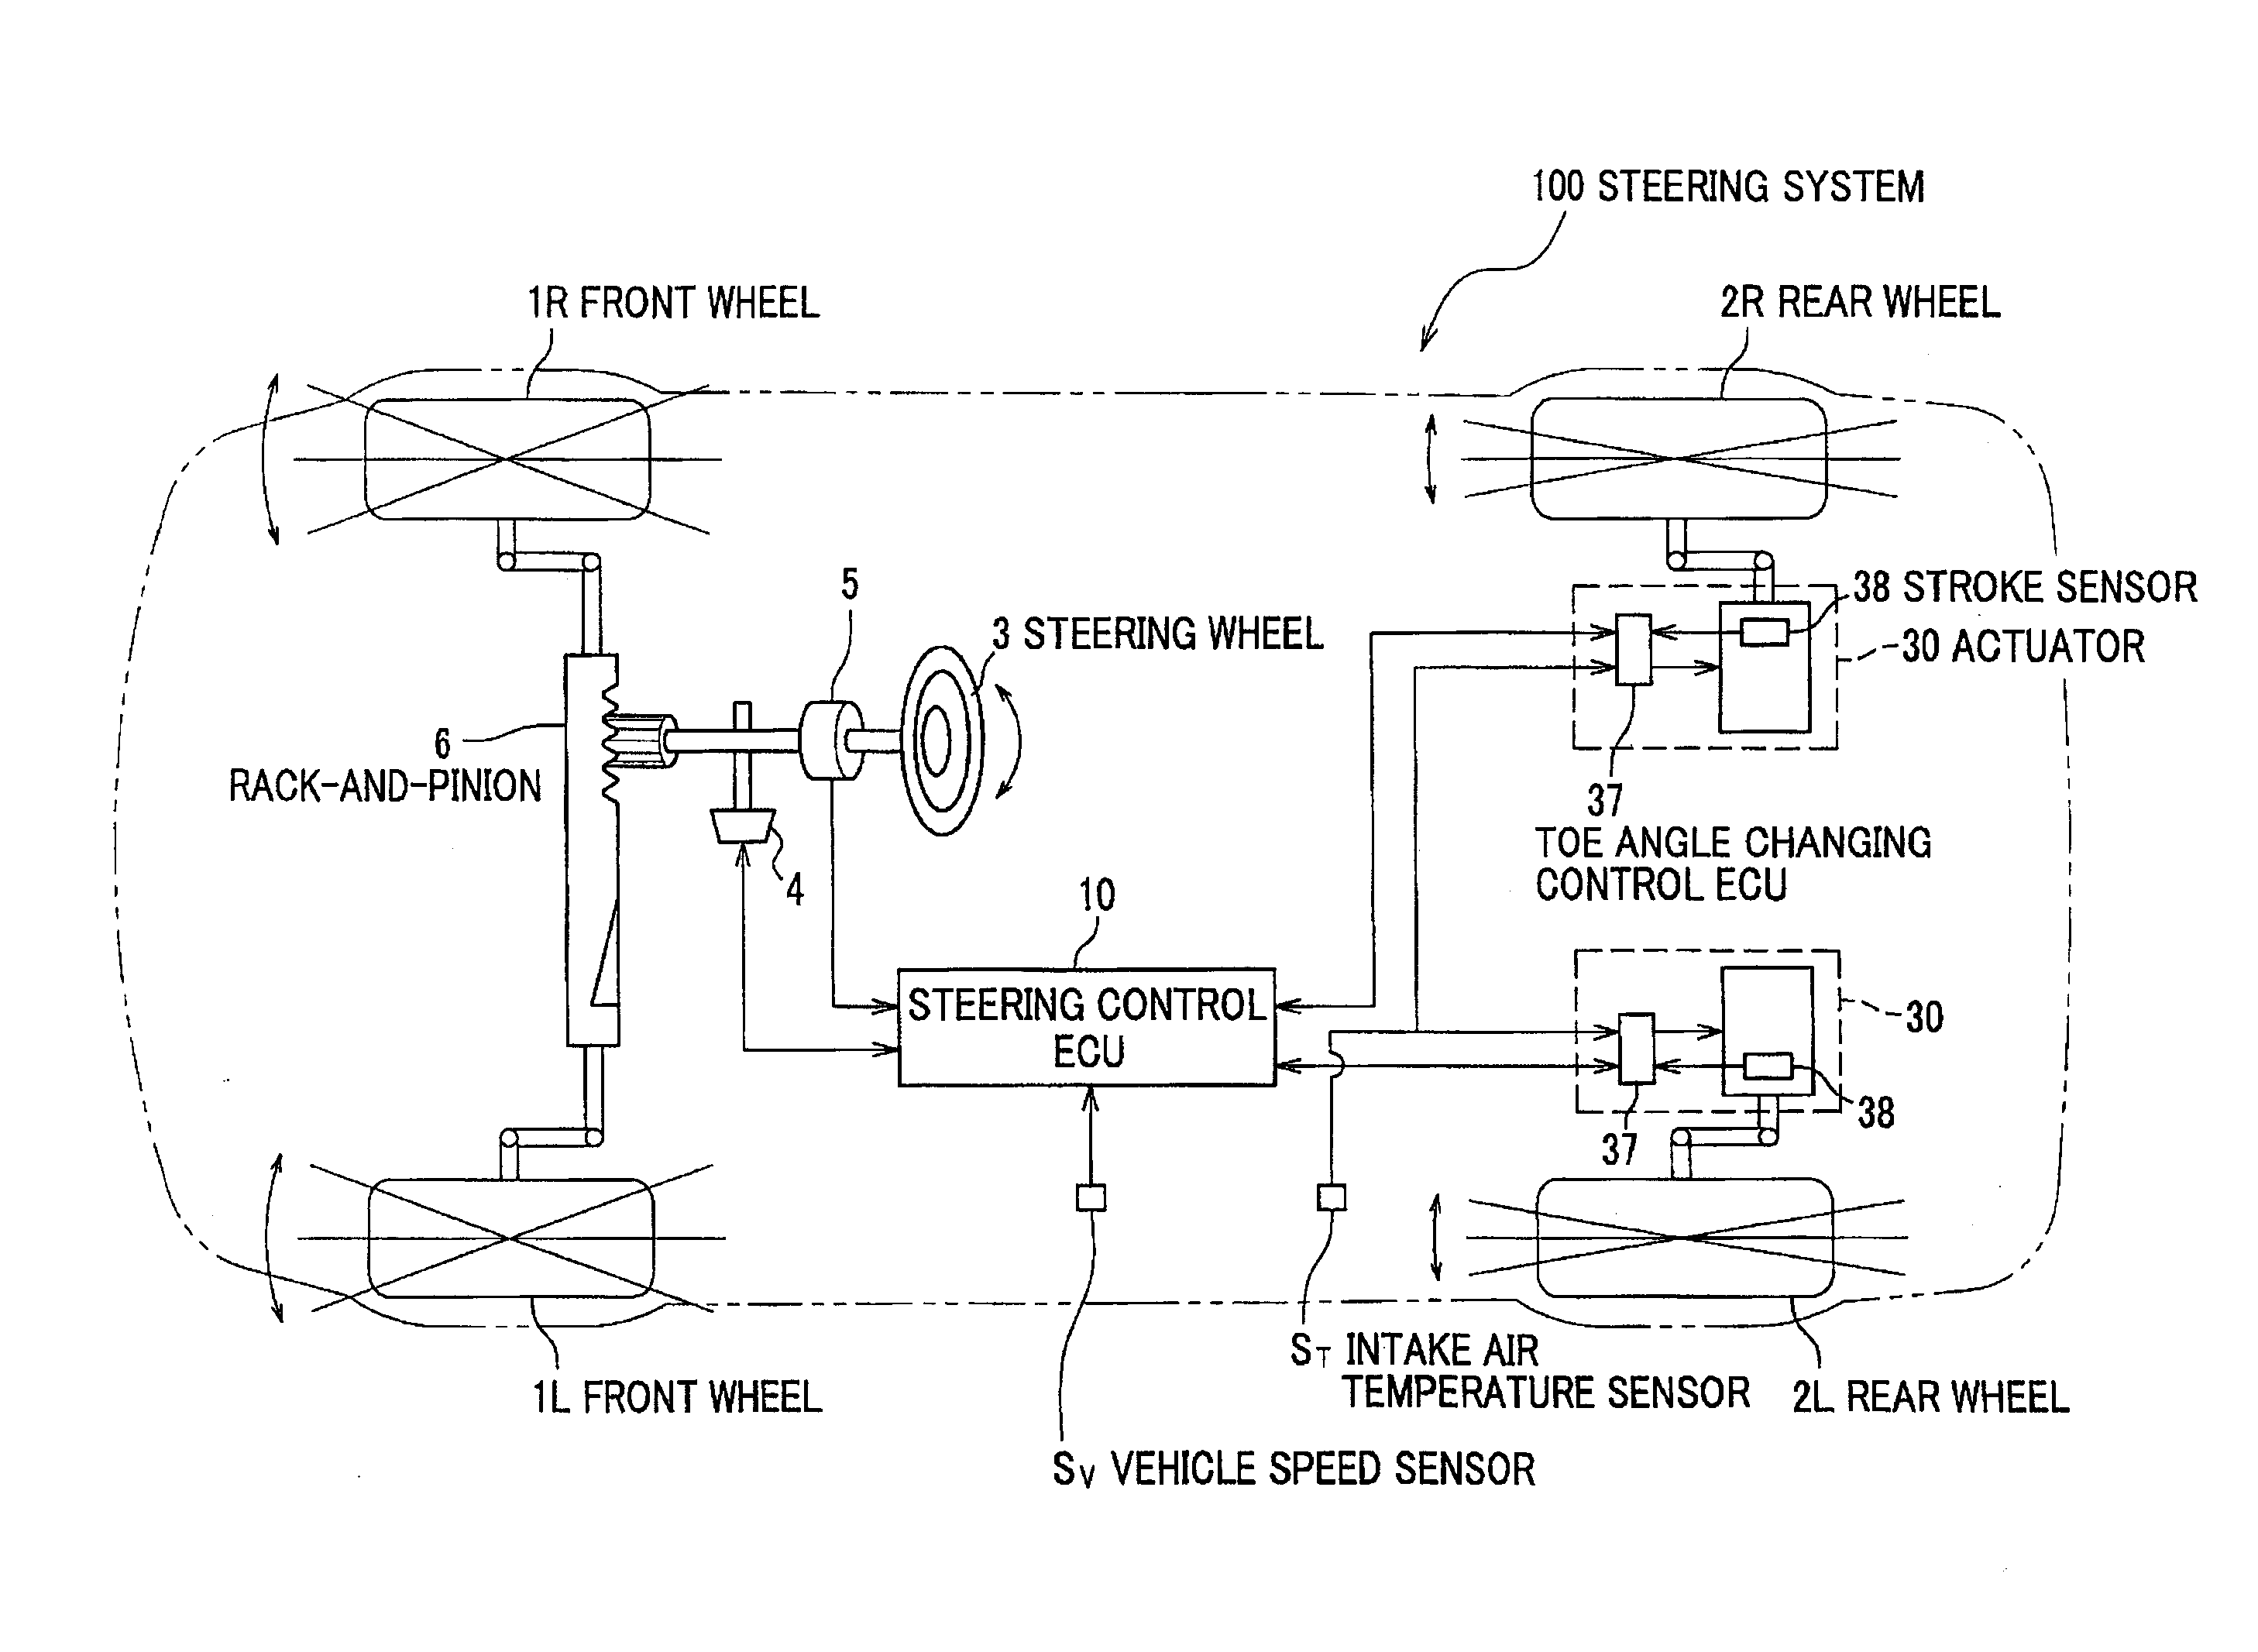 Alignment changing control device